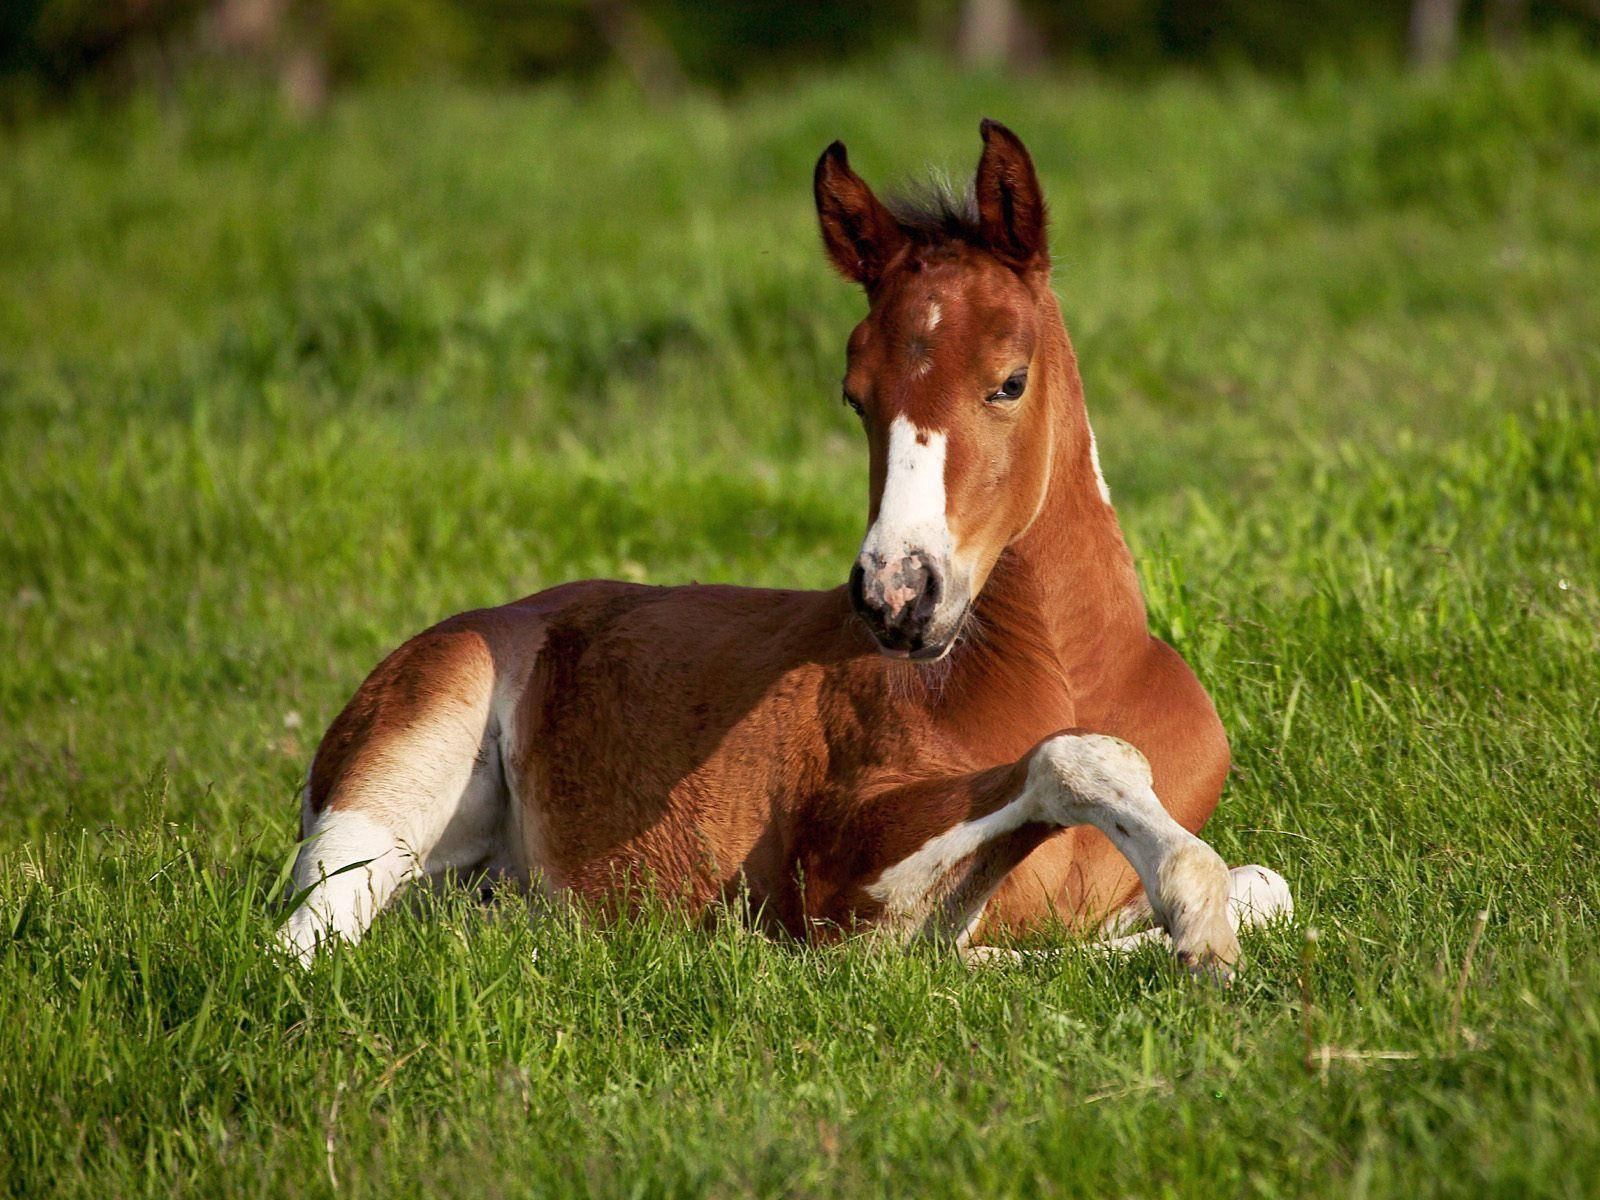 Resting Young Horse Foal On Grass Wallpaper